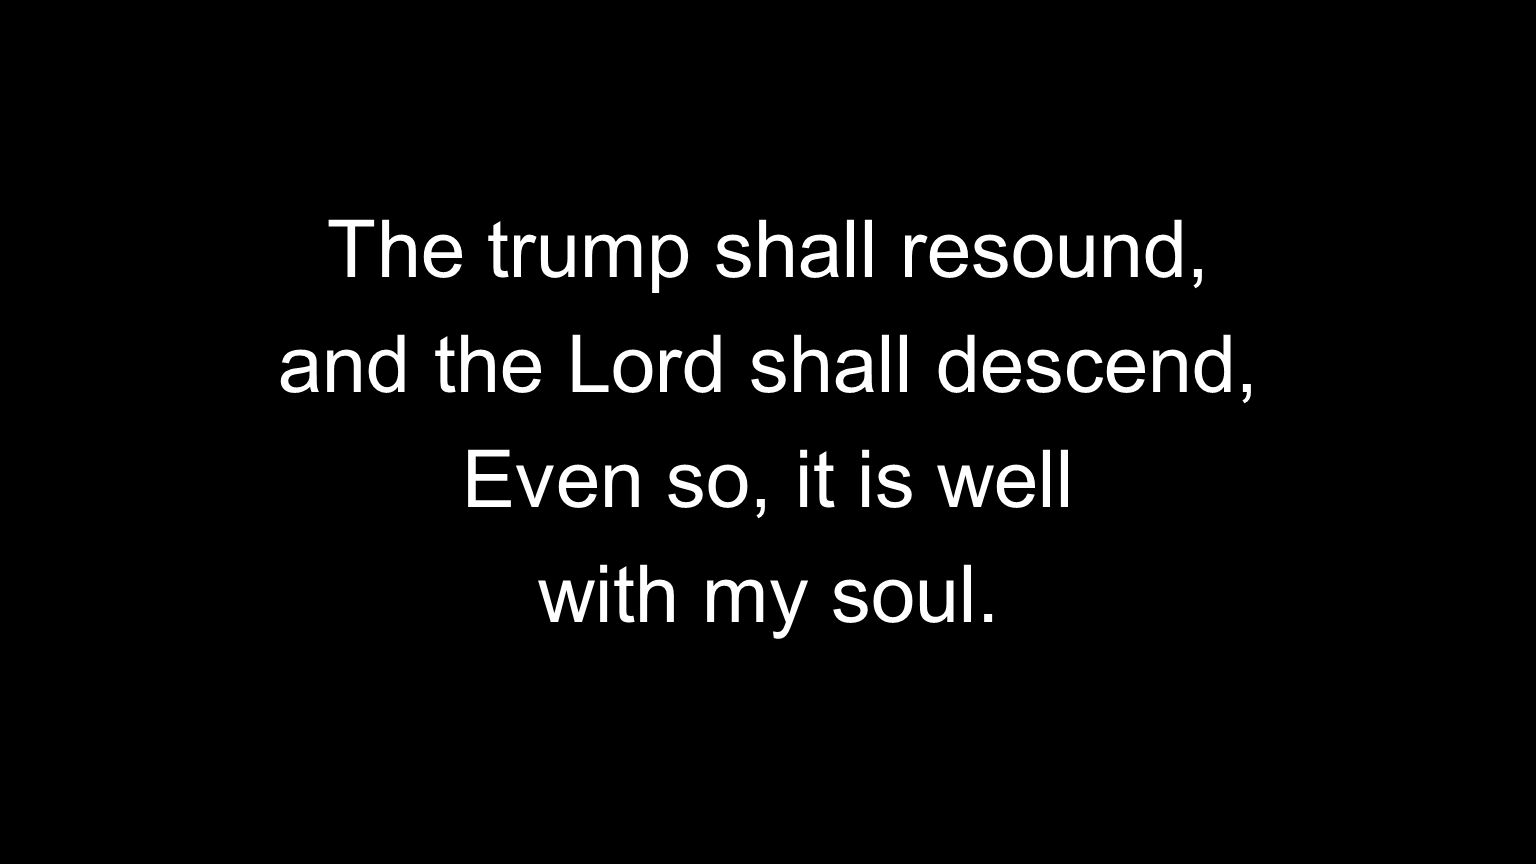 The trump shall resound, and the Lord shall descend, Even so, it is well with my soul.